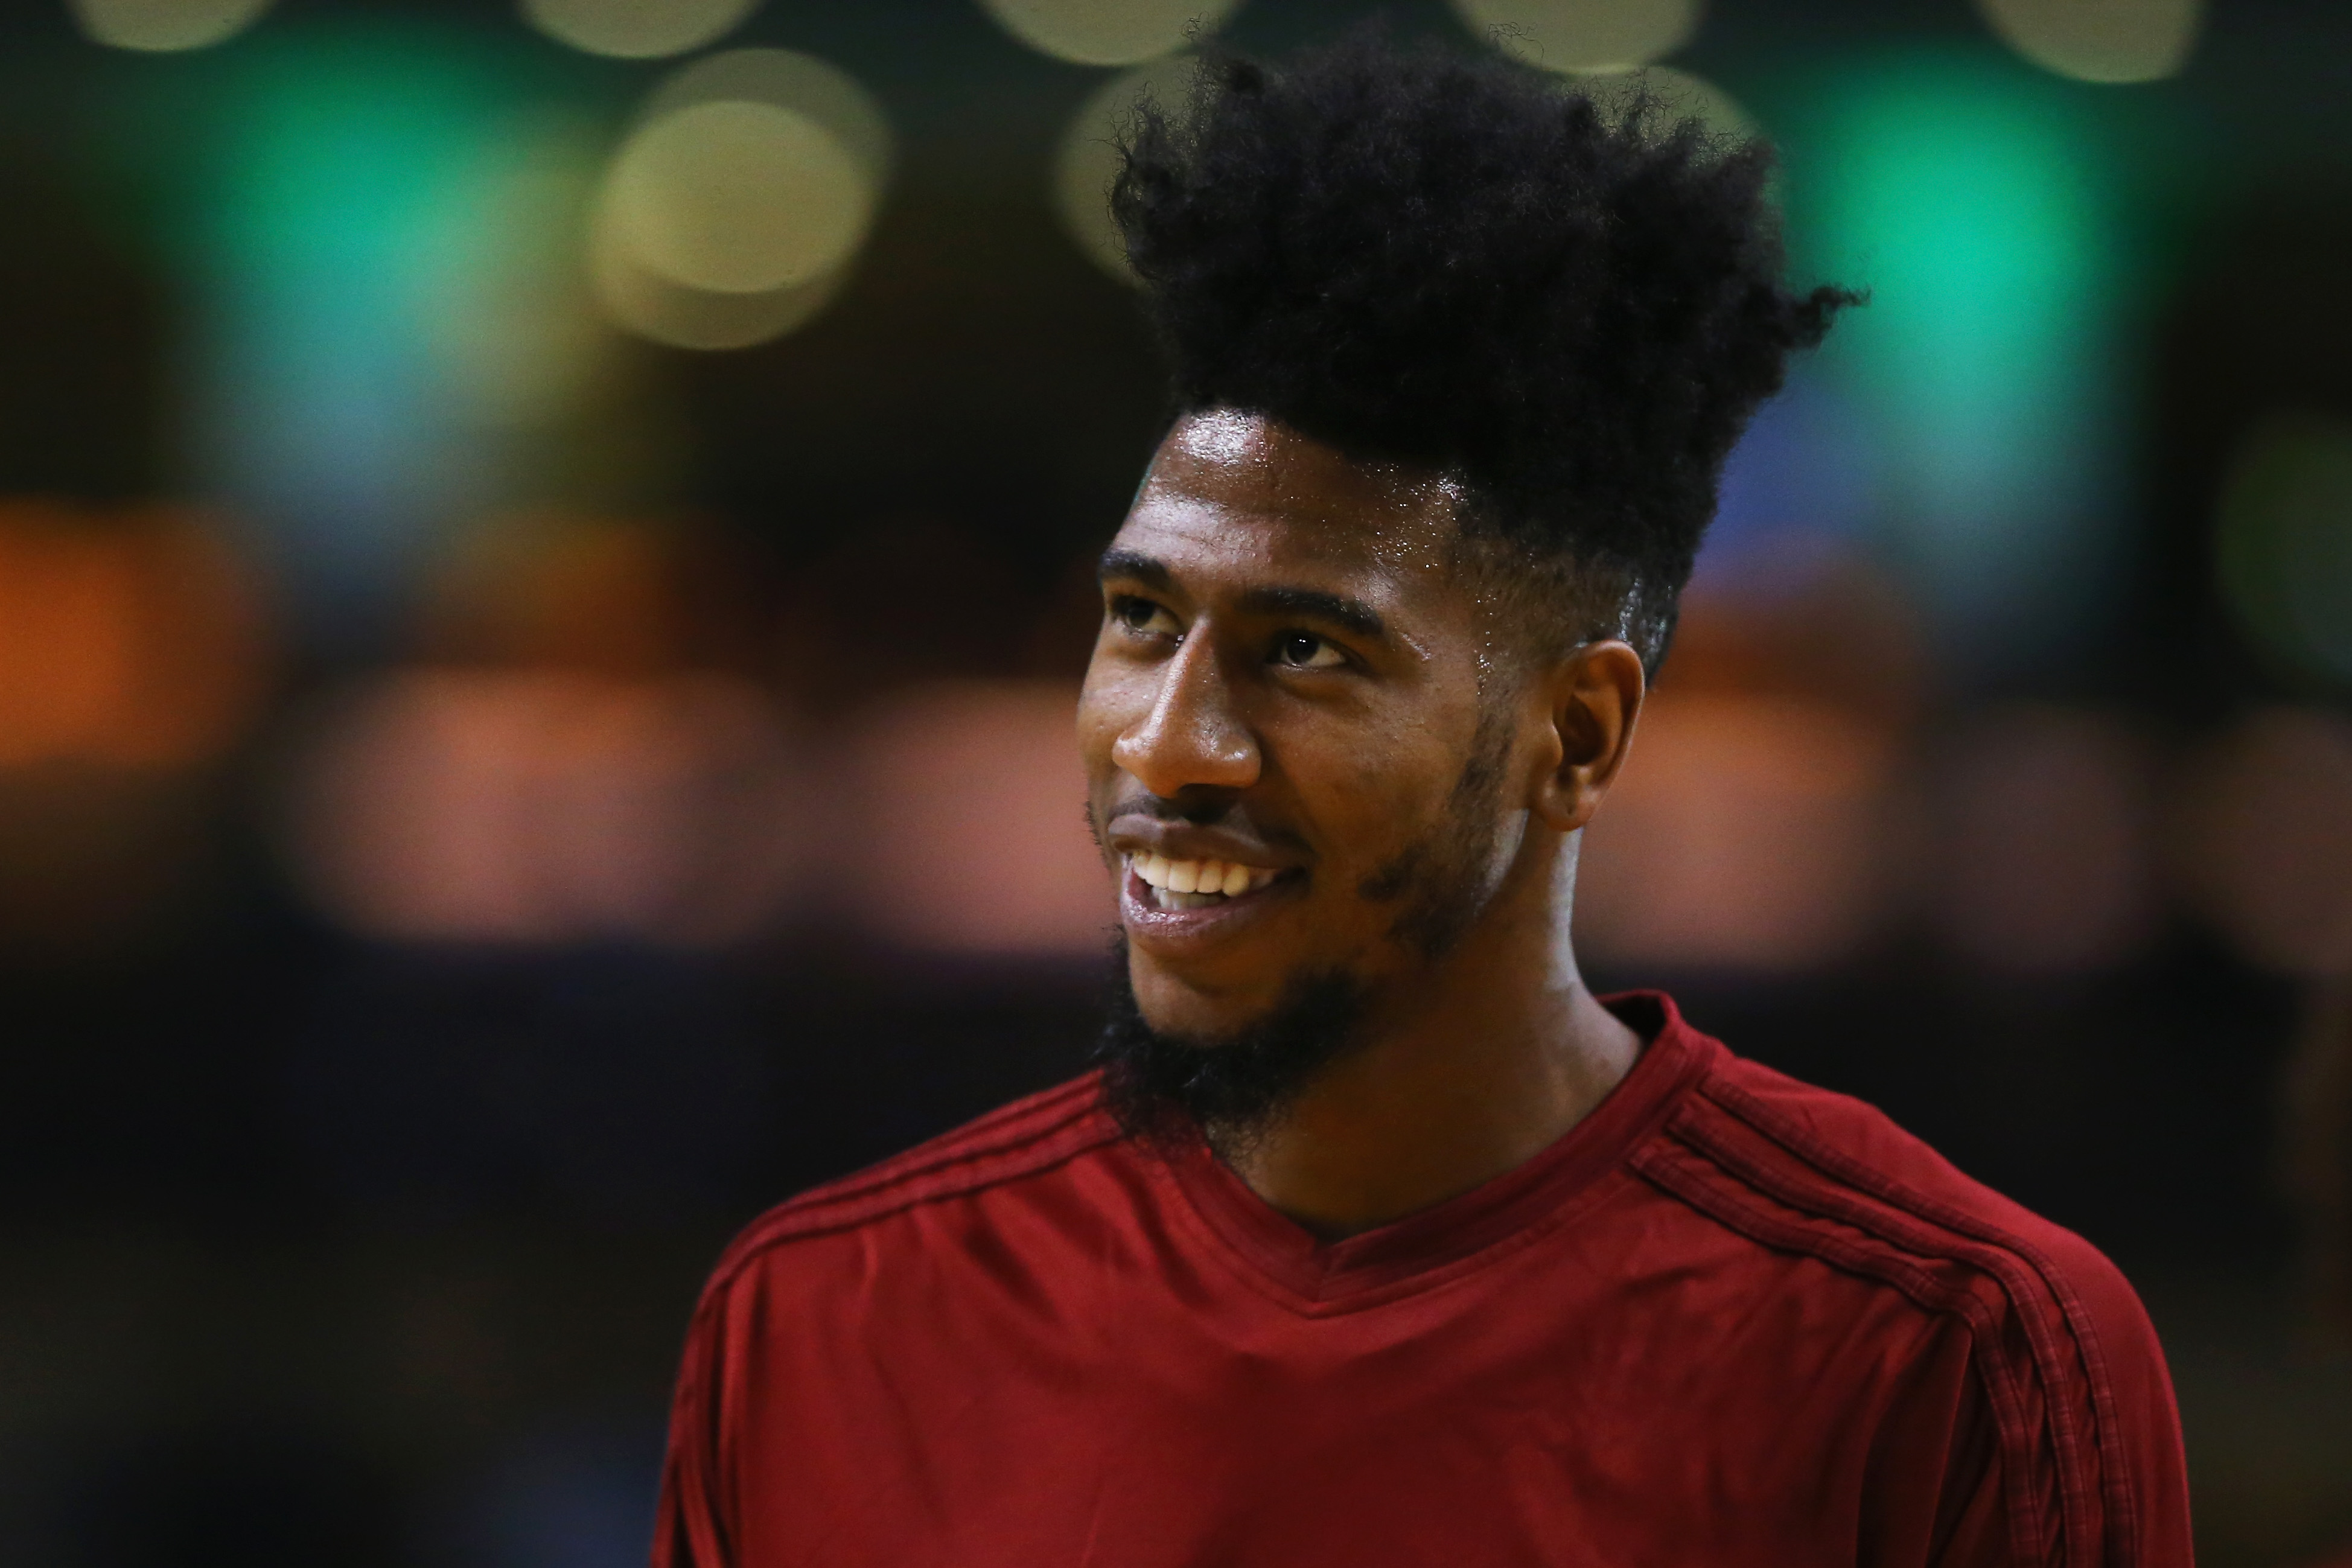 Iman Shumpert of the Cleveland Cavaliers looks on during warmups before the game against the Boston Celtics at TD Garden on December 15, 2015 in Boston, Massachusetts. (Maddie Meyer&mdash;Getty Images)